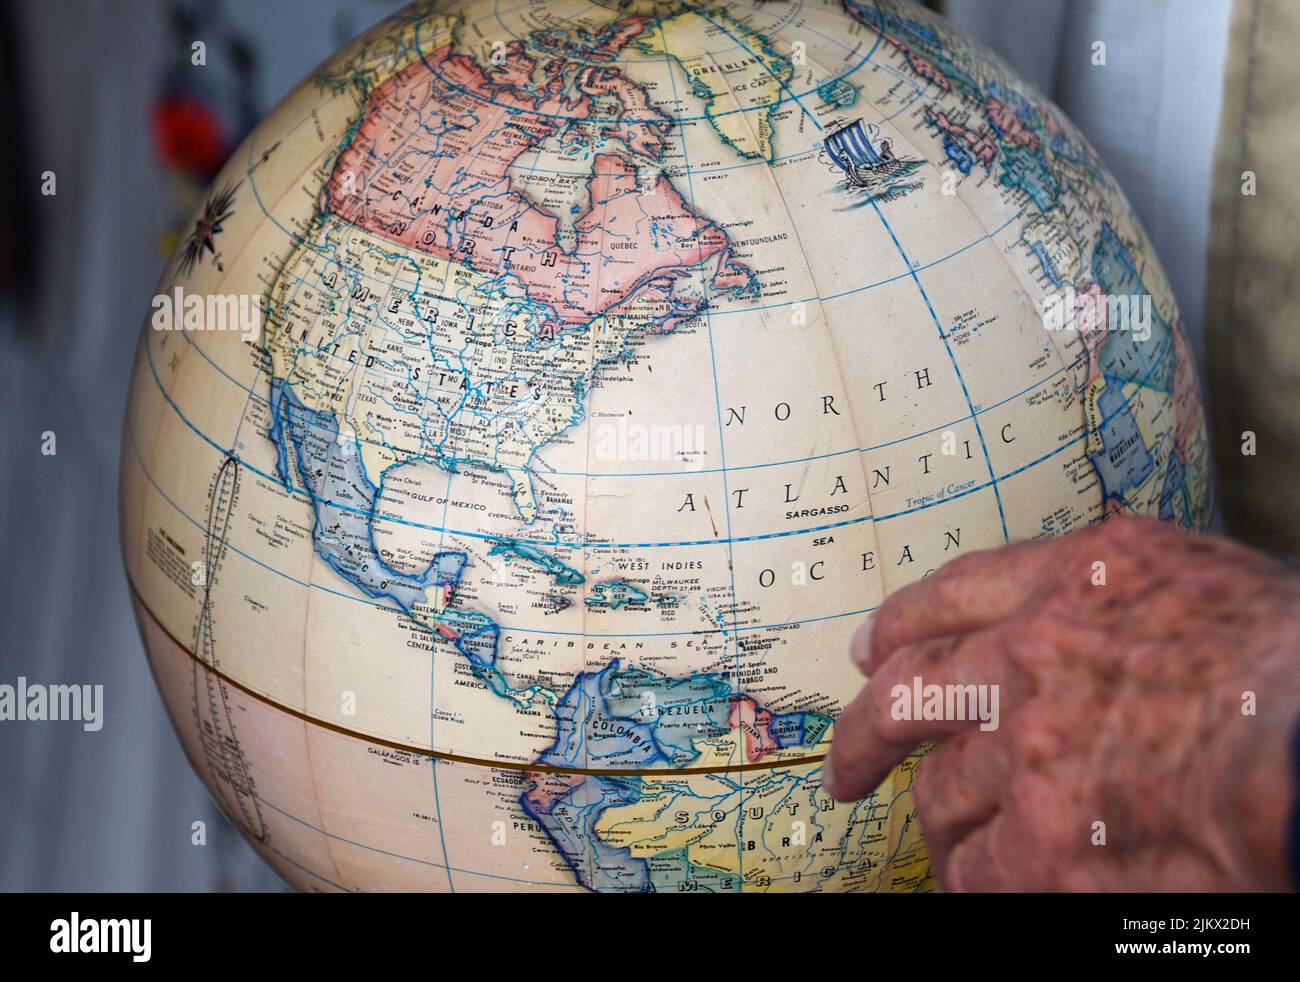 A man examines the North American continent and other geographial locations on a globe for sale in an antique shop. Stock Photo